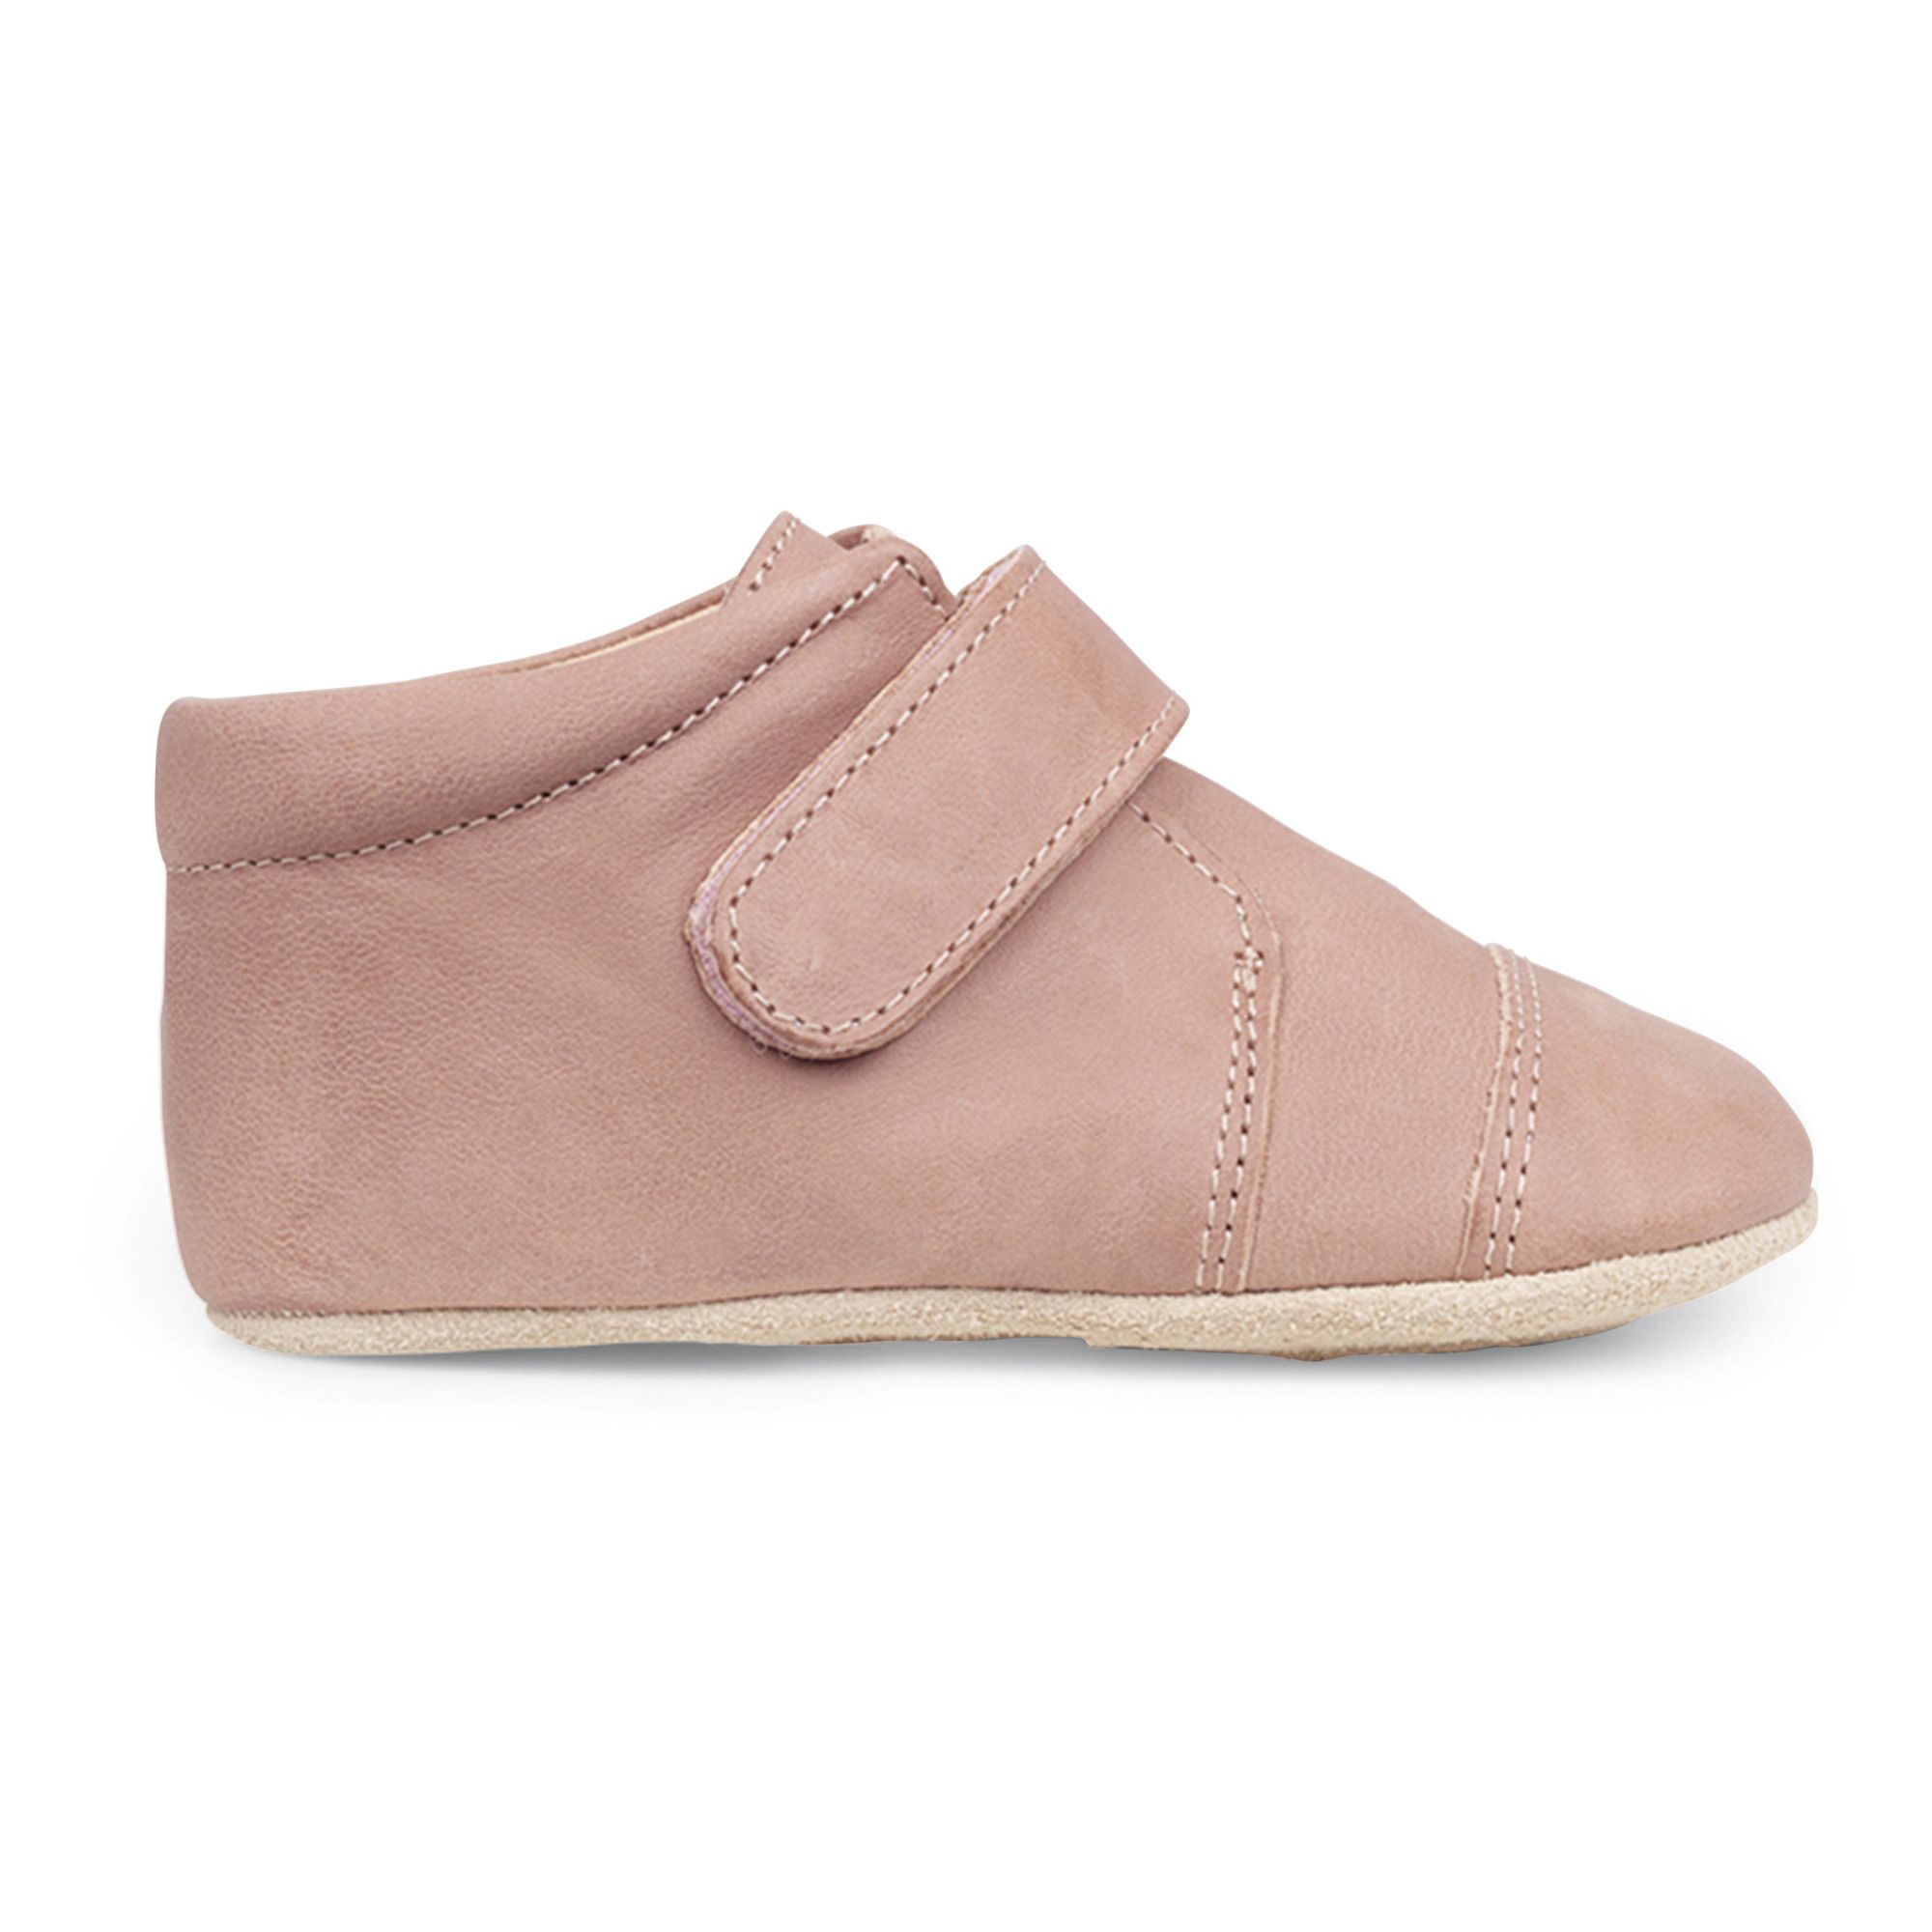 Petit Nord - Chaussons Scratch - Fille - Vieux Rose